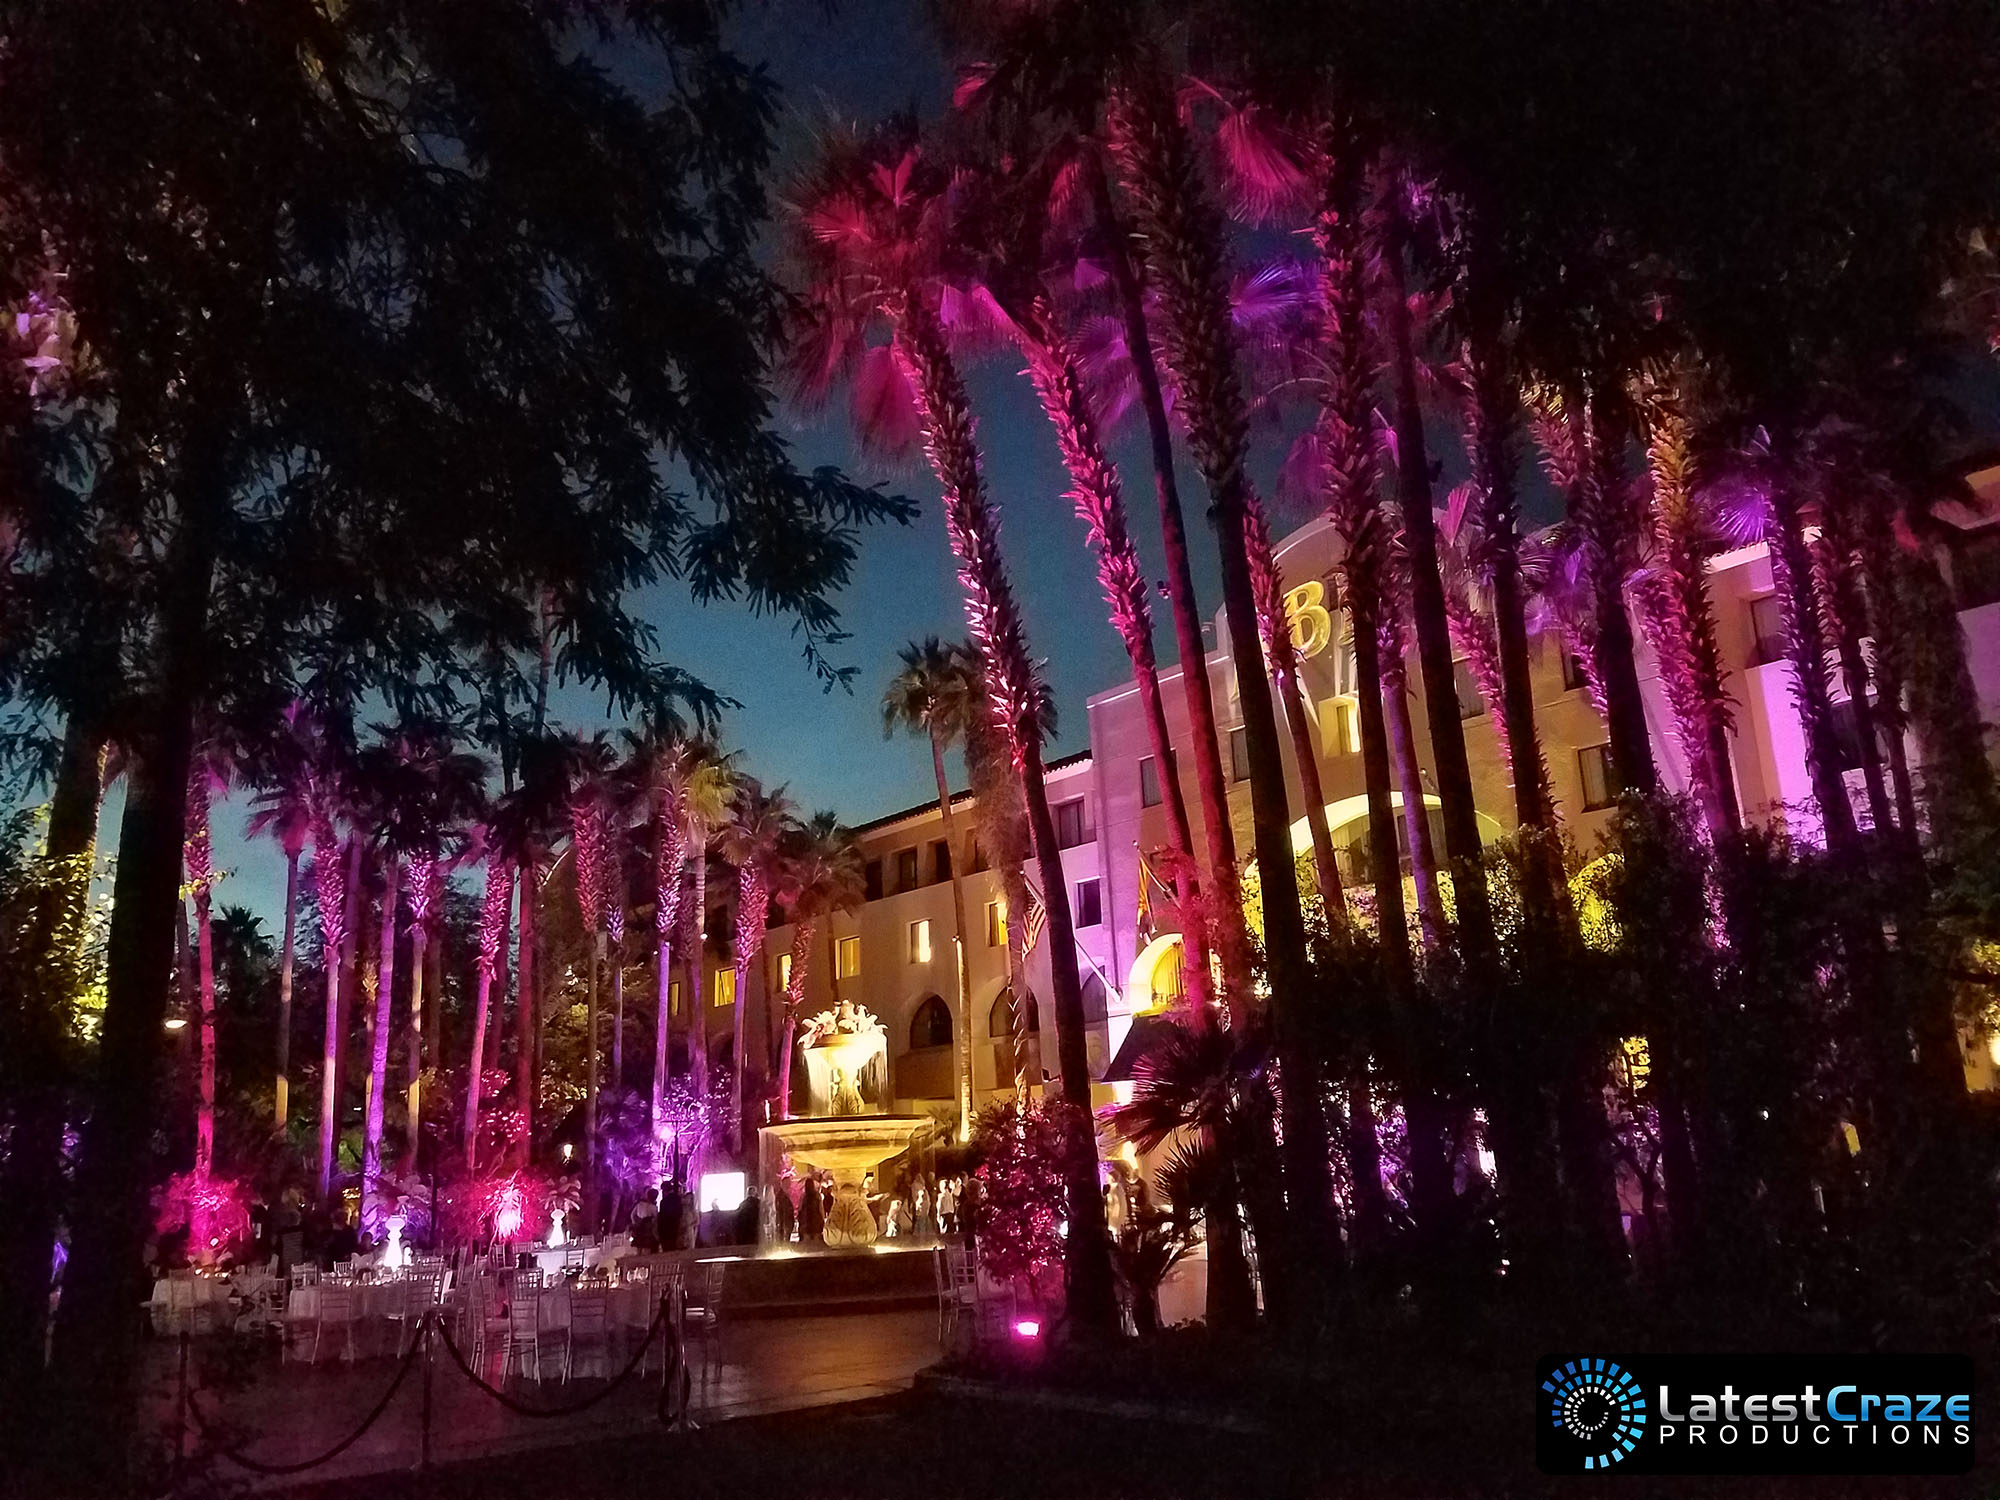 uplighting palm trees tempe mission palms Latest Craze Productions